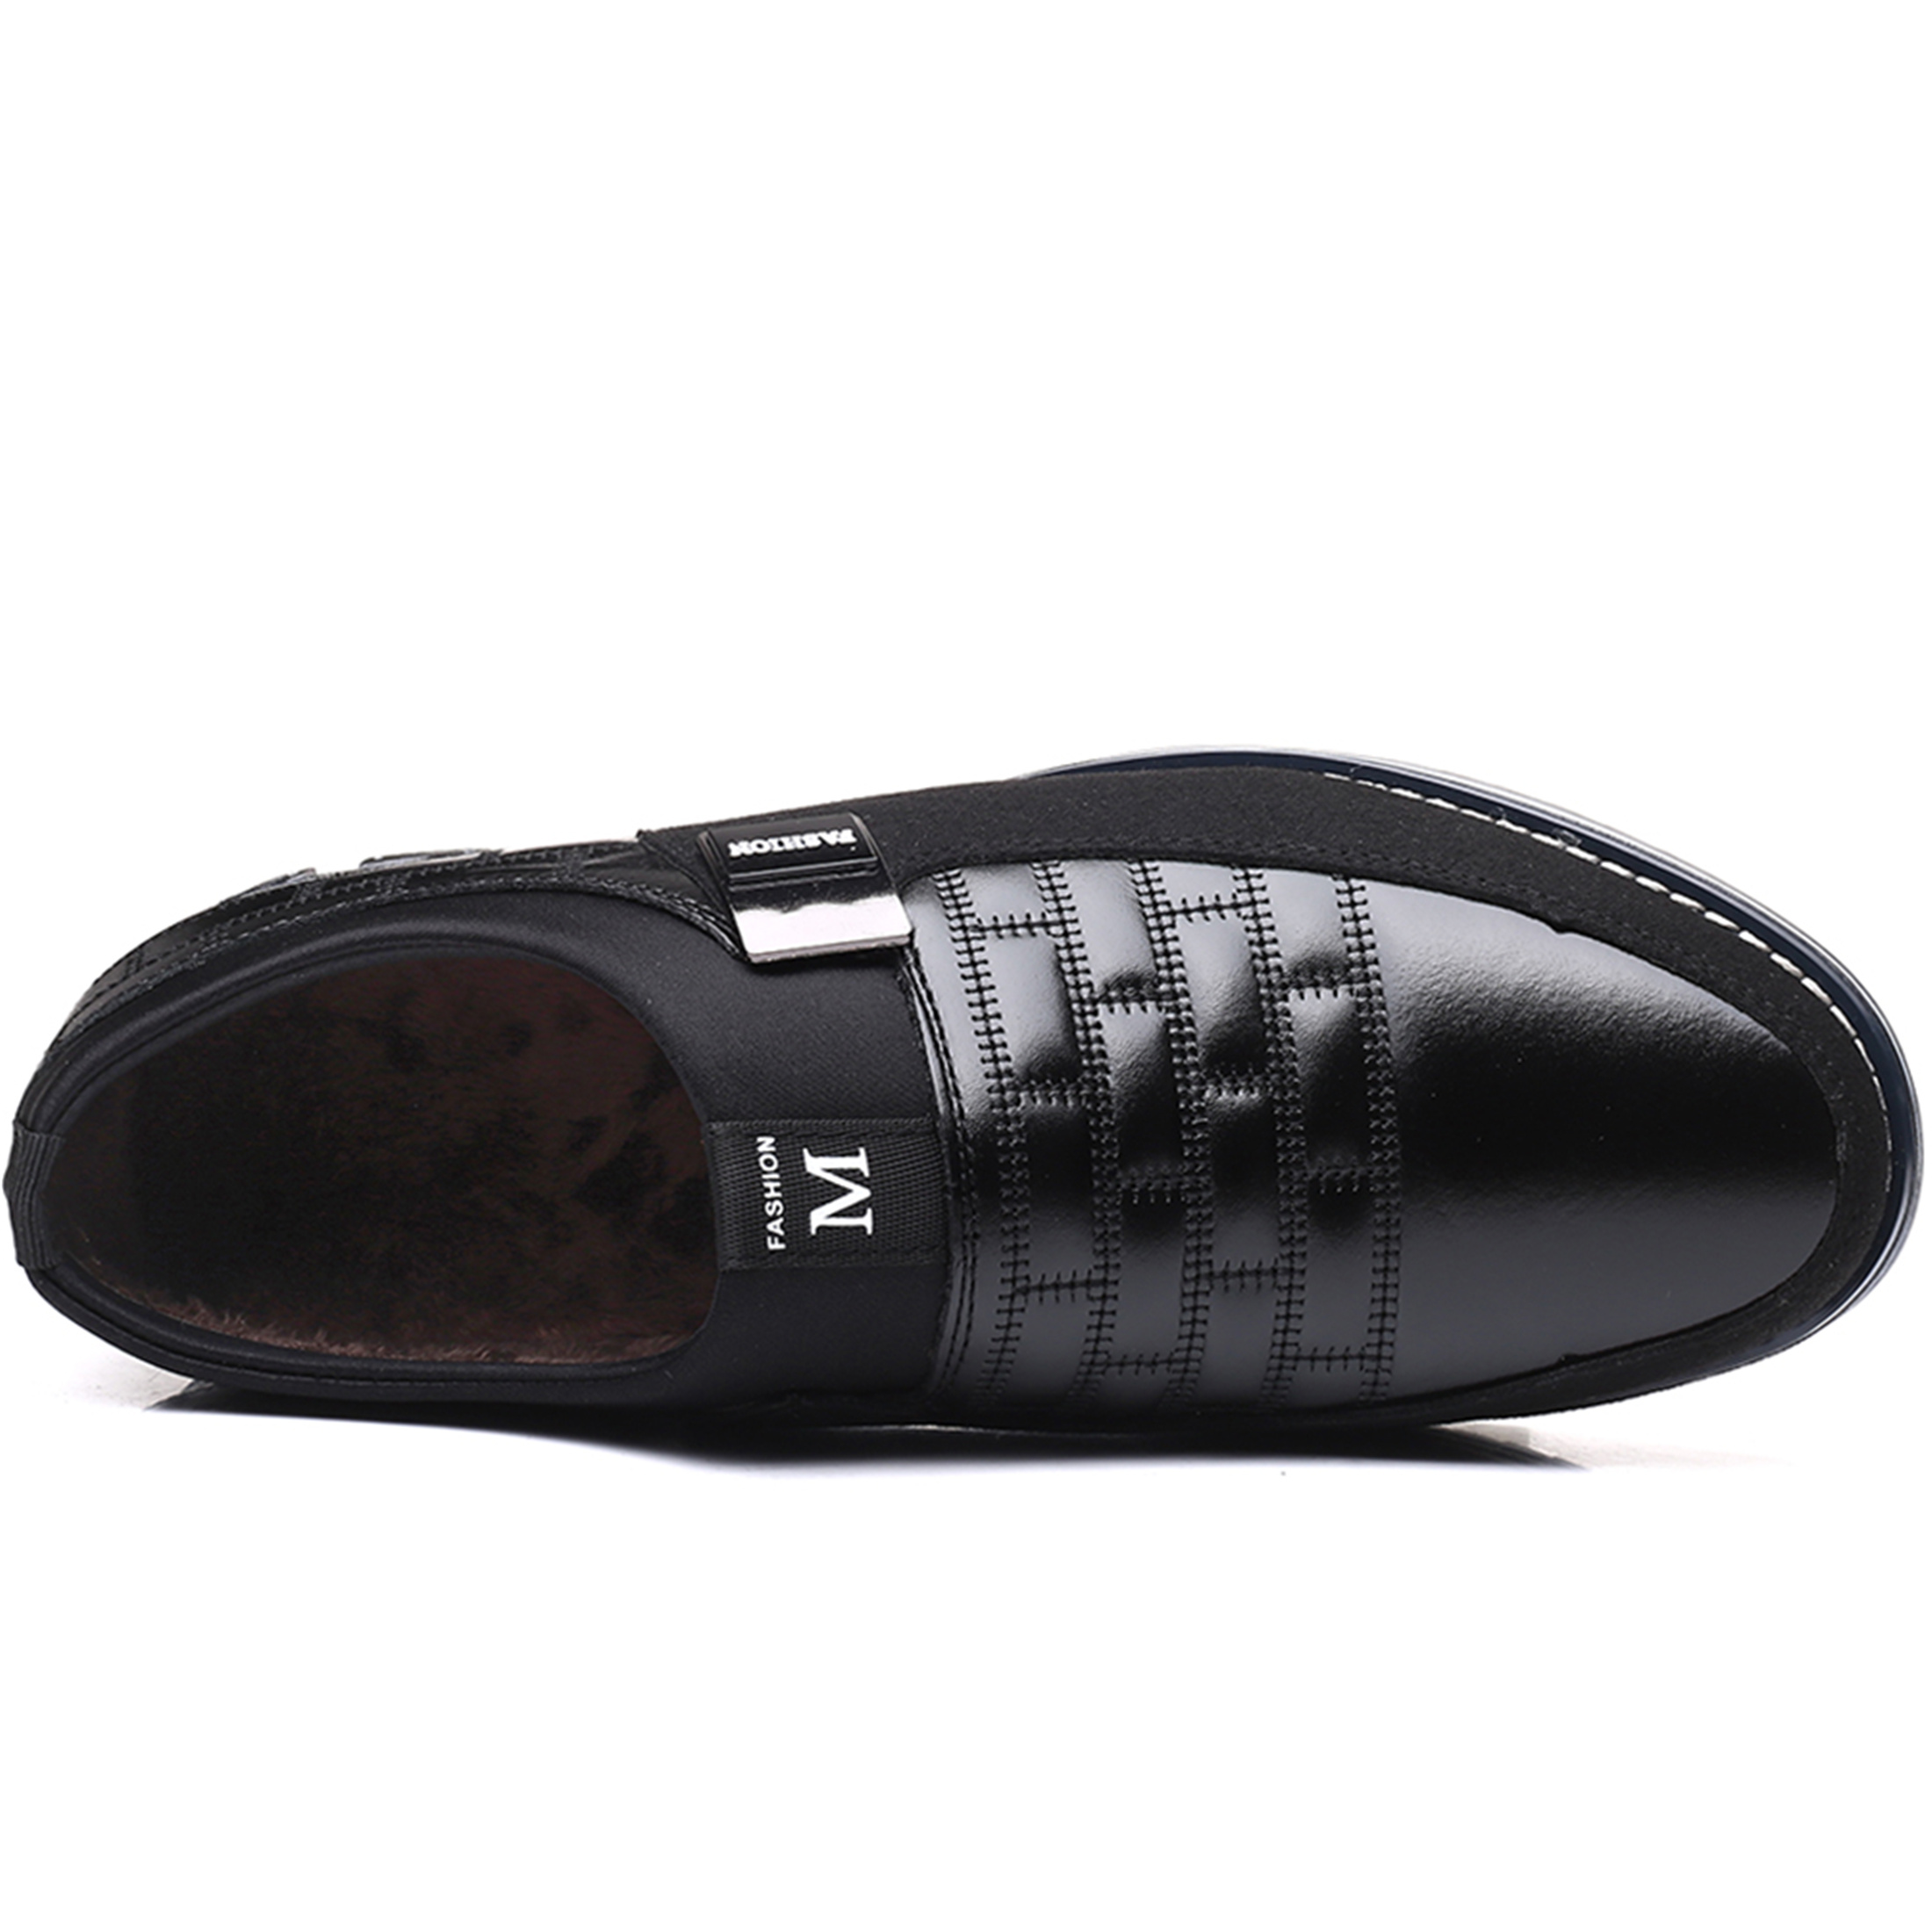 COSIDRAM Men Casual Shoes Breathable Comfort Loafers - image 2 of 6